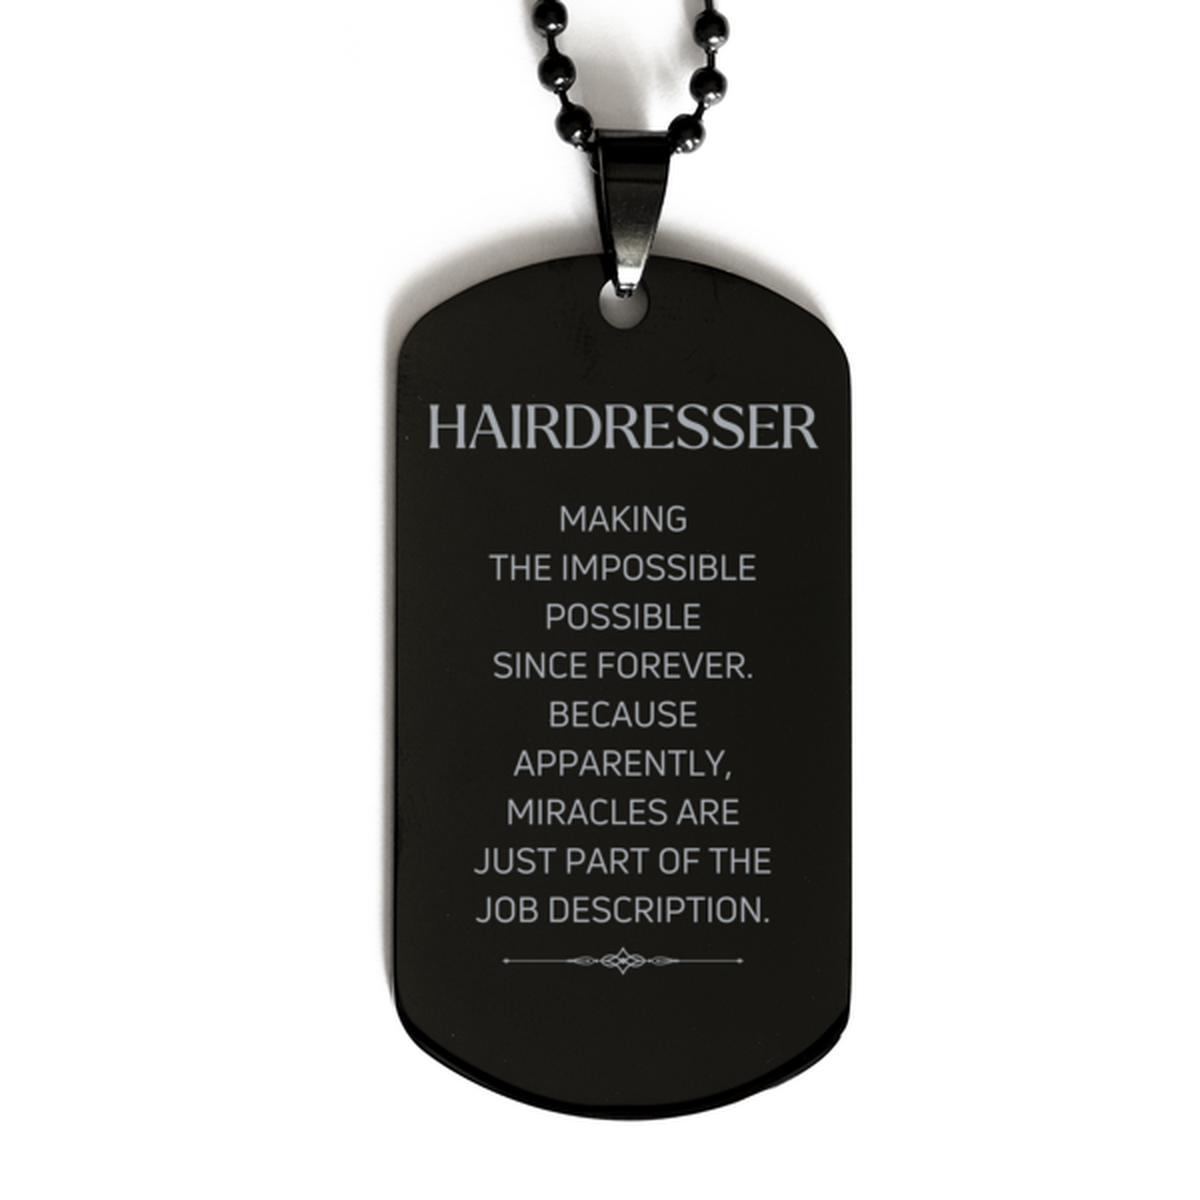 Funny Hairdresser Gifts, Miracles are just part of the job description, Inspirational Birthday Black Dog Tag For Hairdresser, Men, Women, Coworkers, Friends, Boss